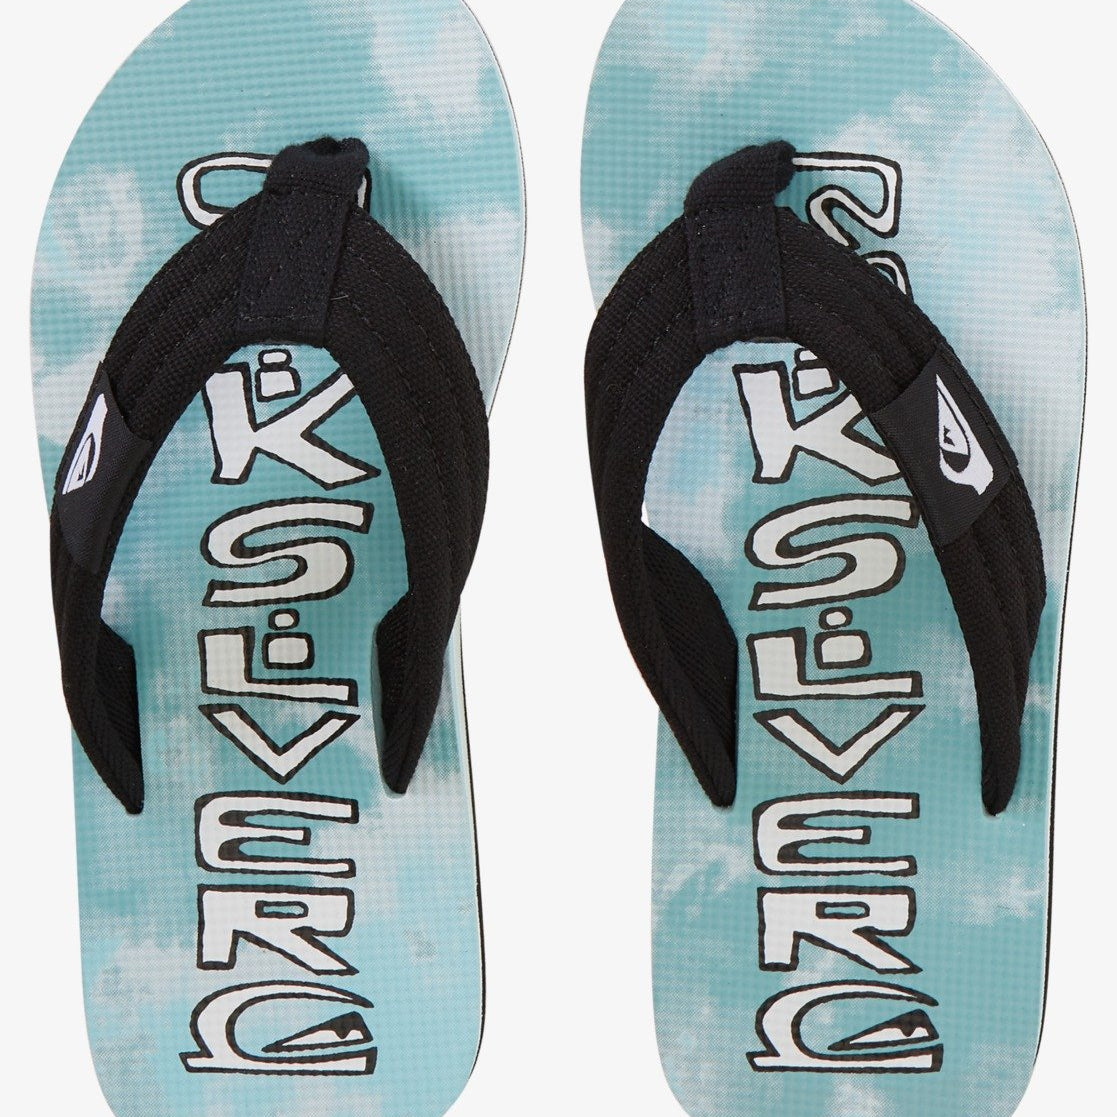 Quiksilver Molokai Layback Youth Sandal BYJ1-Blue 1 10 C